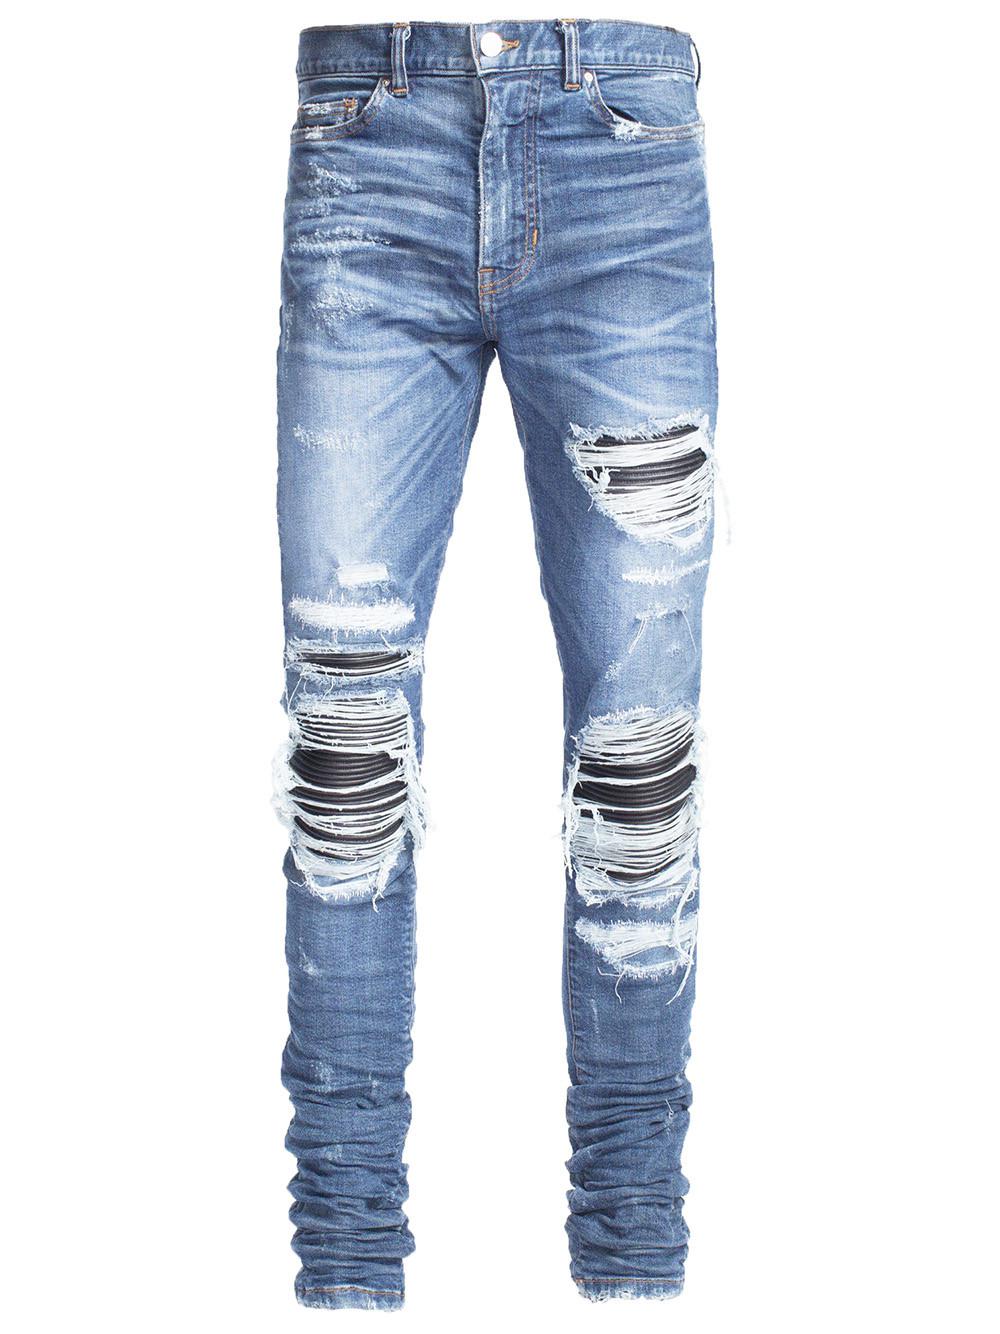 Amiri Mx1 Leather Patch Jeans Classic Indigo in Blue for Men - Lyst